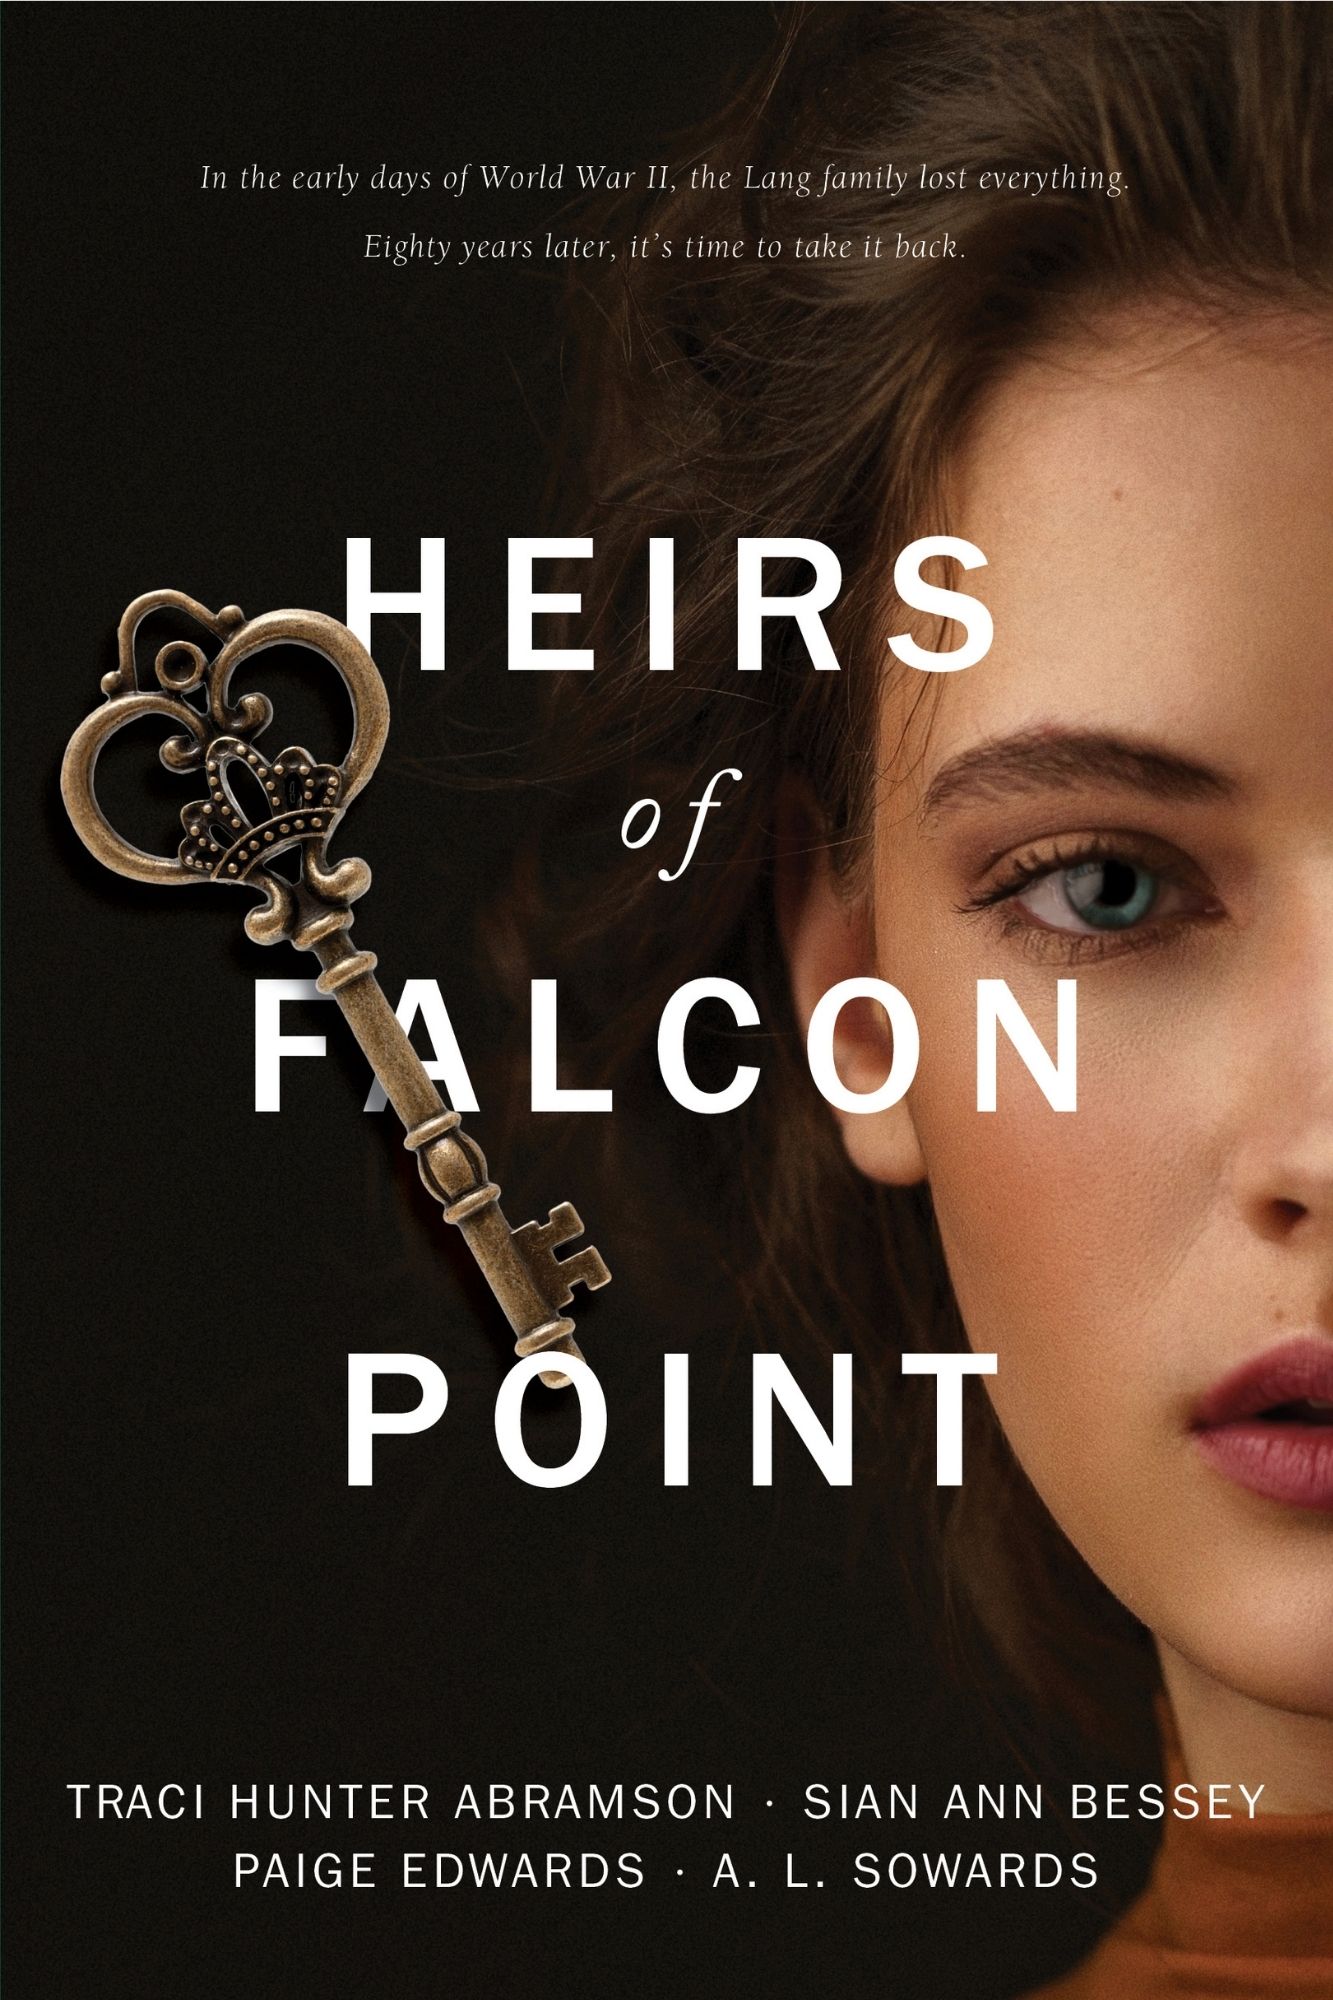 heirs-of-falcon-point-web